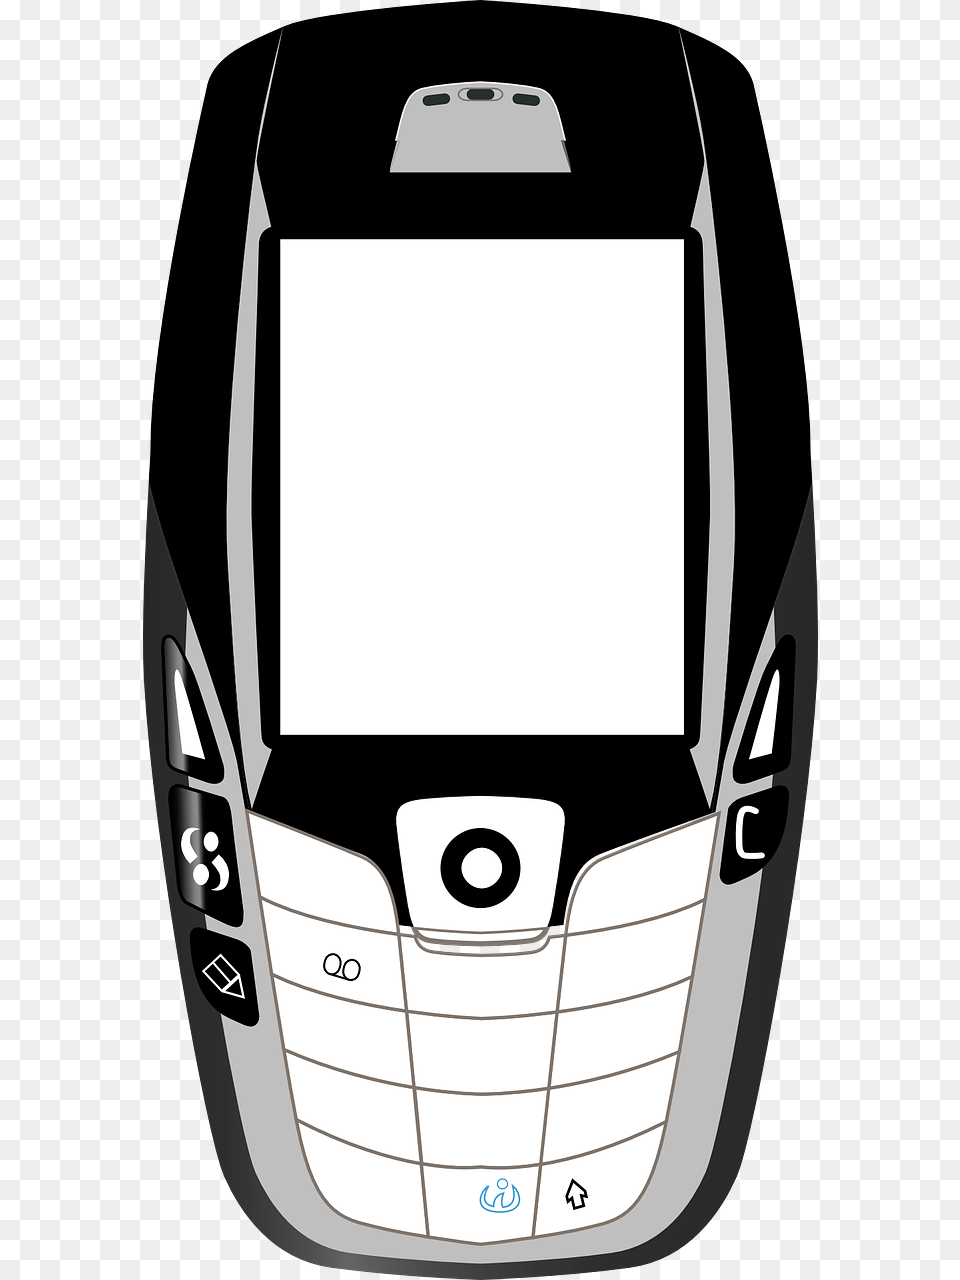 Mobile Phone, Electronics, Mobile Phone, Texting Png